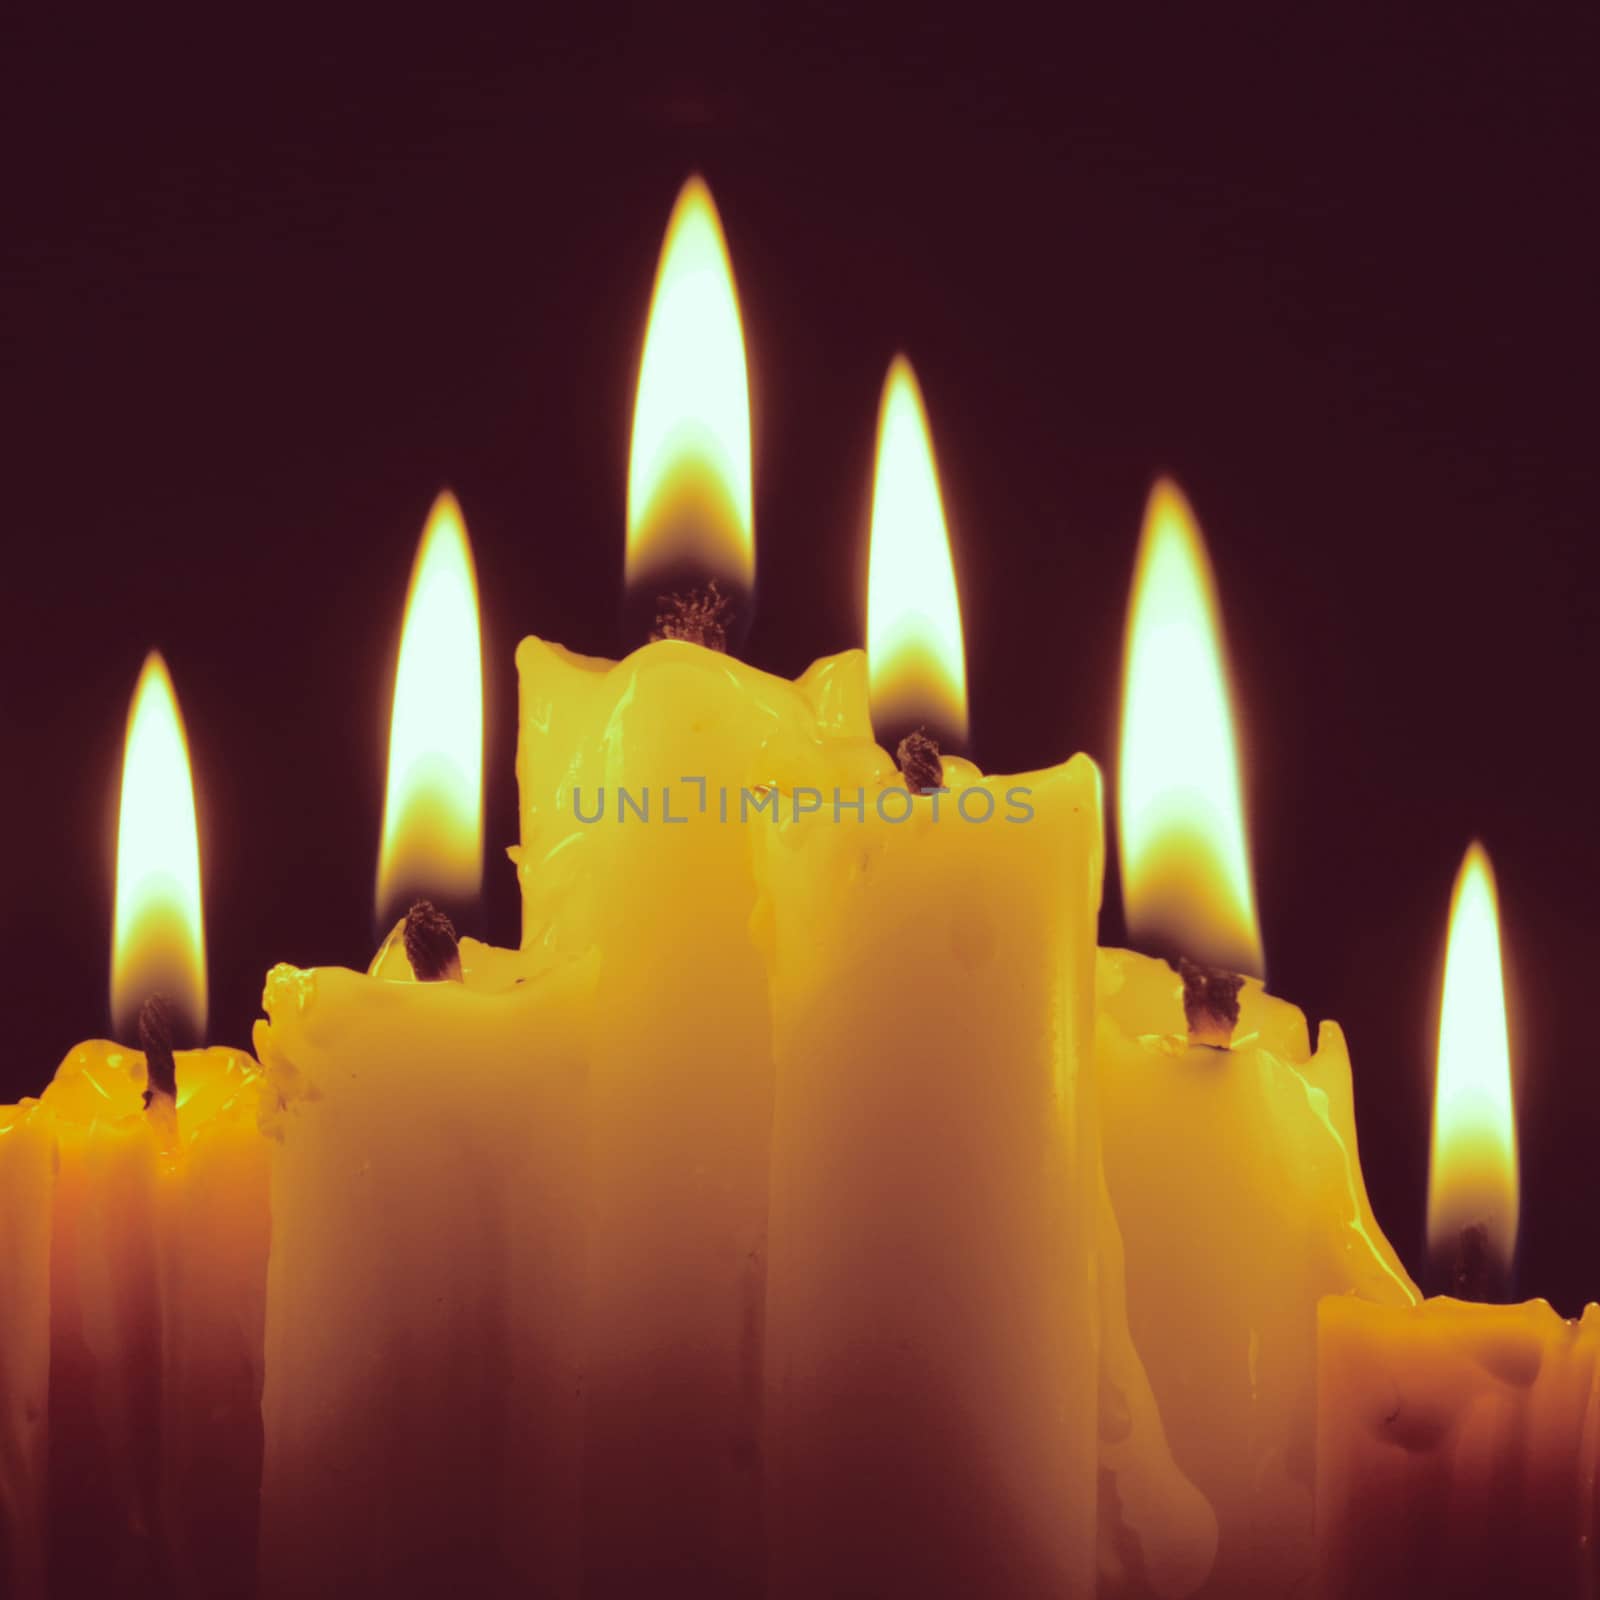 Burning candles on black with retro filter effect